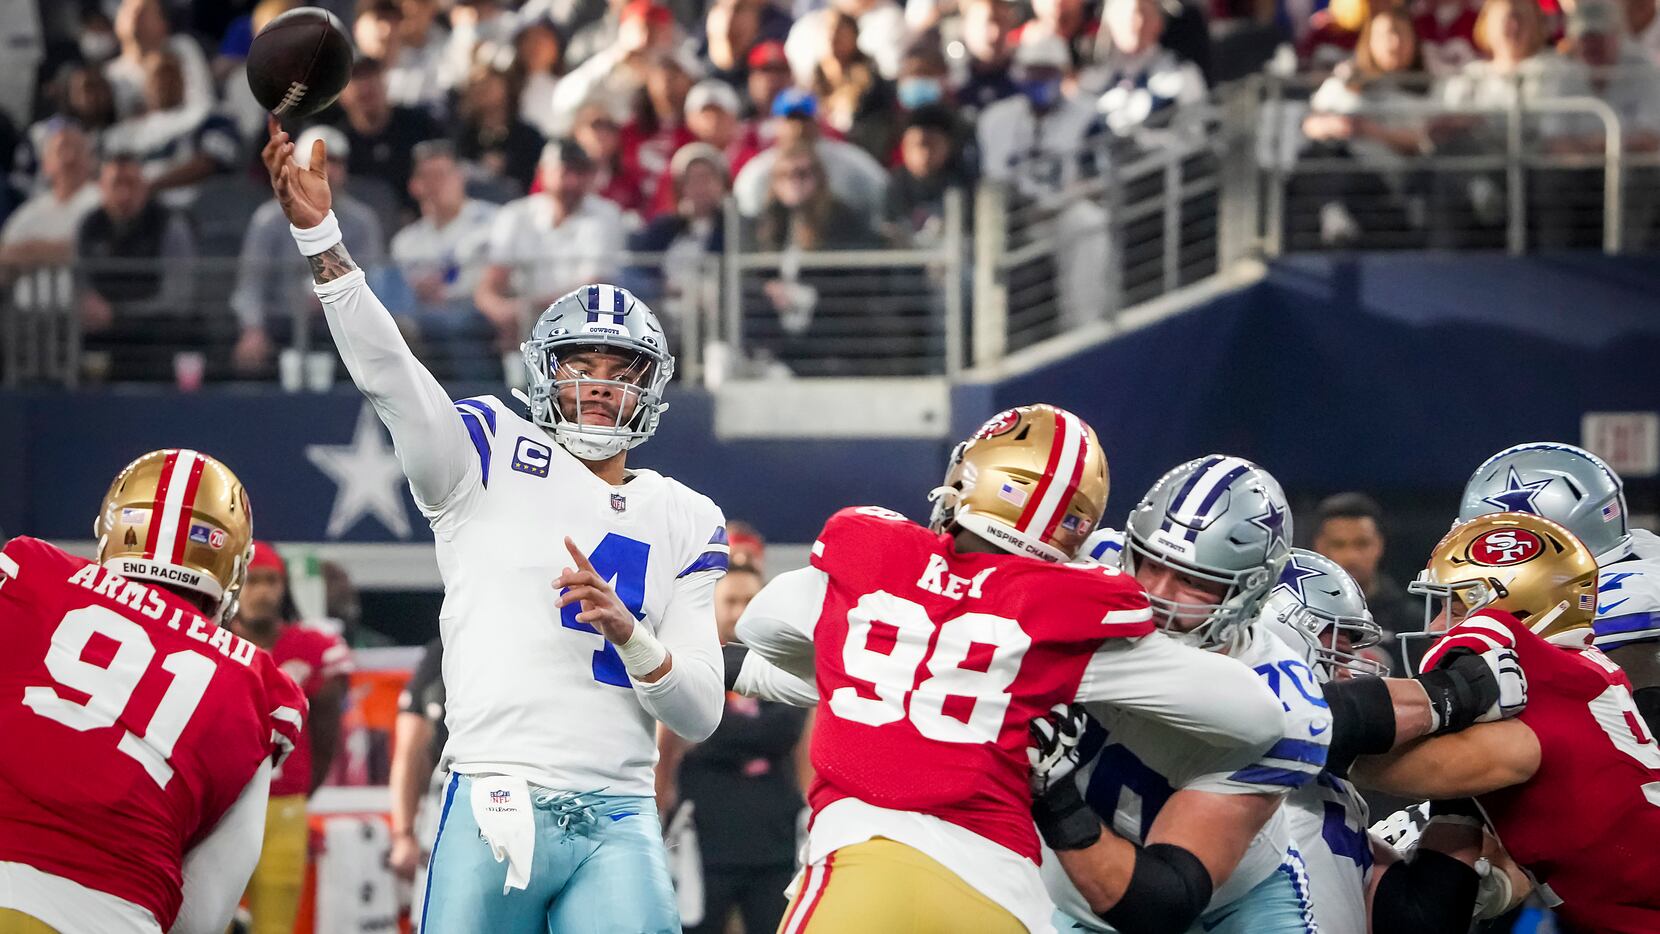 How a series of unexpected events led to the Cowboys' wild victory